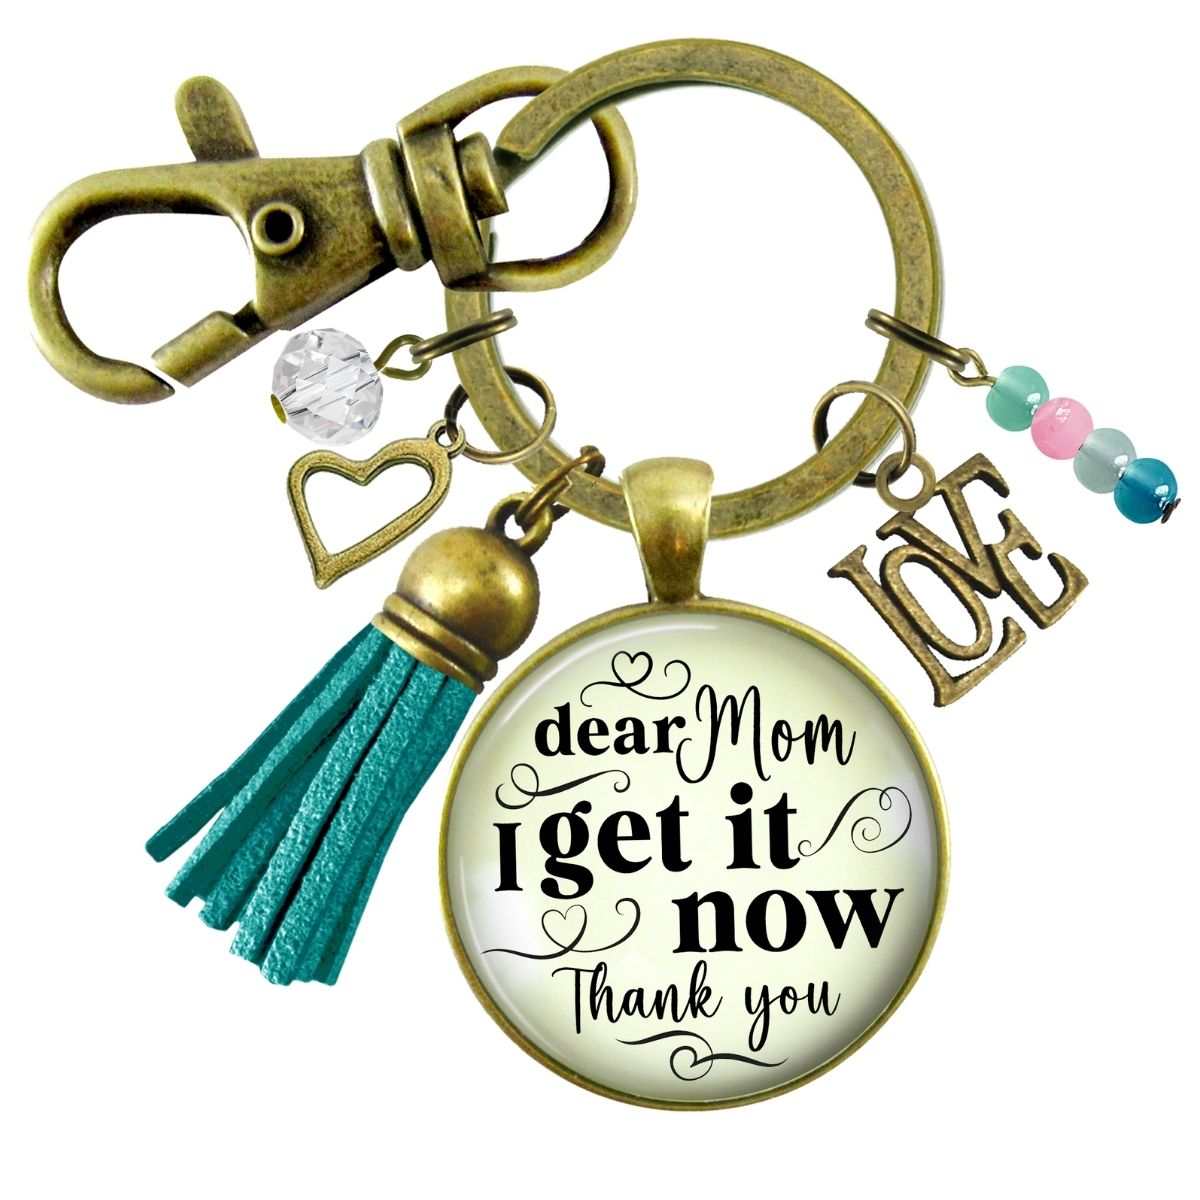 Handmade Gutsy Goodness Jewelry Dear Mom I Get It Now Keychain Gift From Adult Daughter Loving Boho Jewelry Tassel Charm & Card